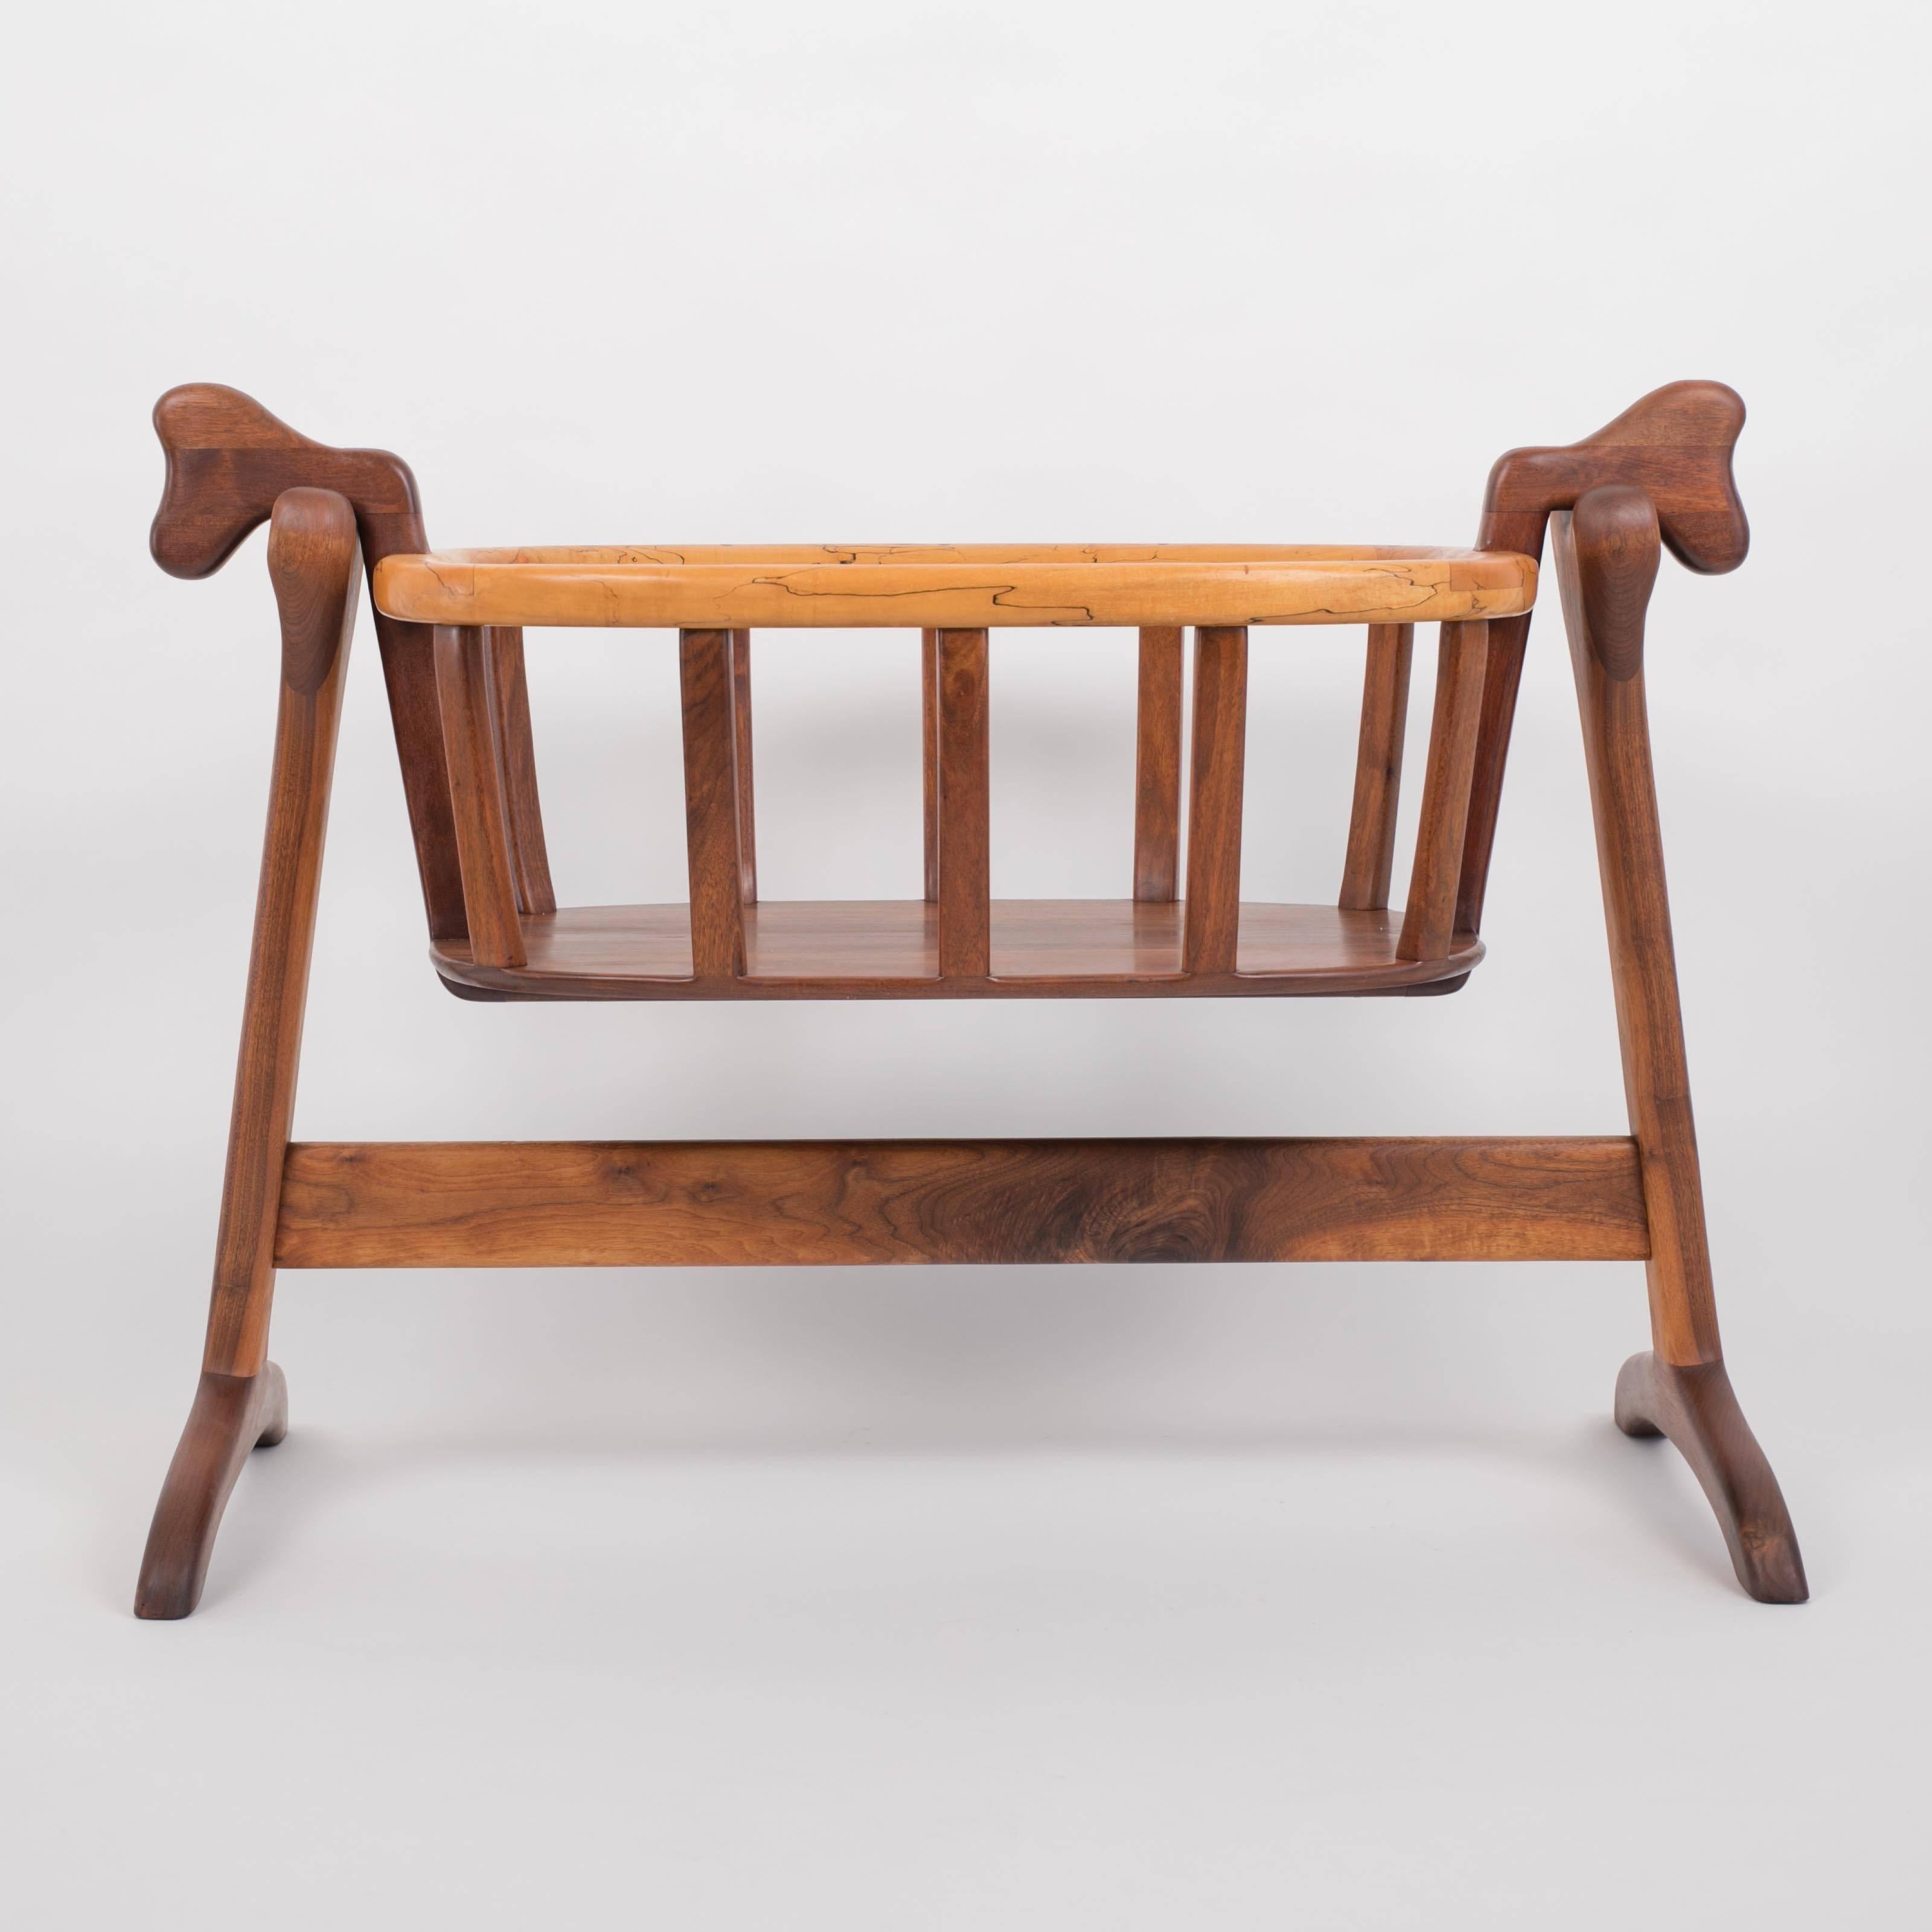 An American-made organic modern bassinet by Illinois-based craftsman Ejner Pagh. The bassinet has a wide lip in a contrasting light wood. Sculpted bars with biomorphic lines rest on the trestles of the stand and allow the piece to rock gently. A